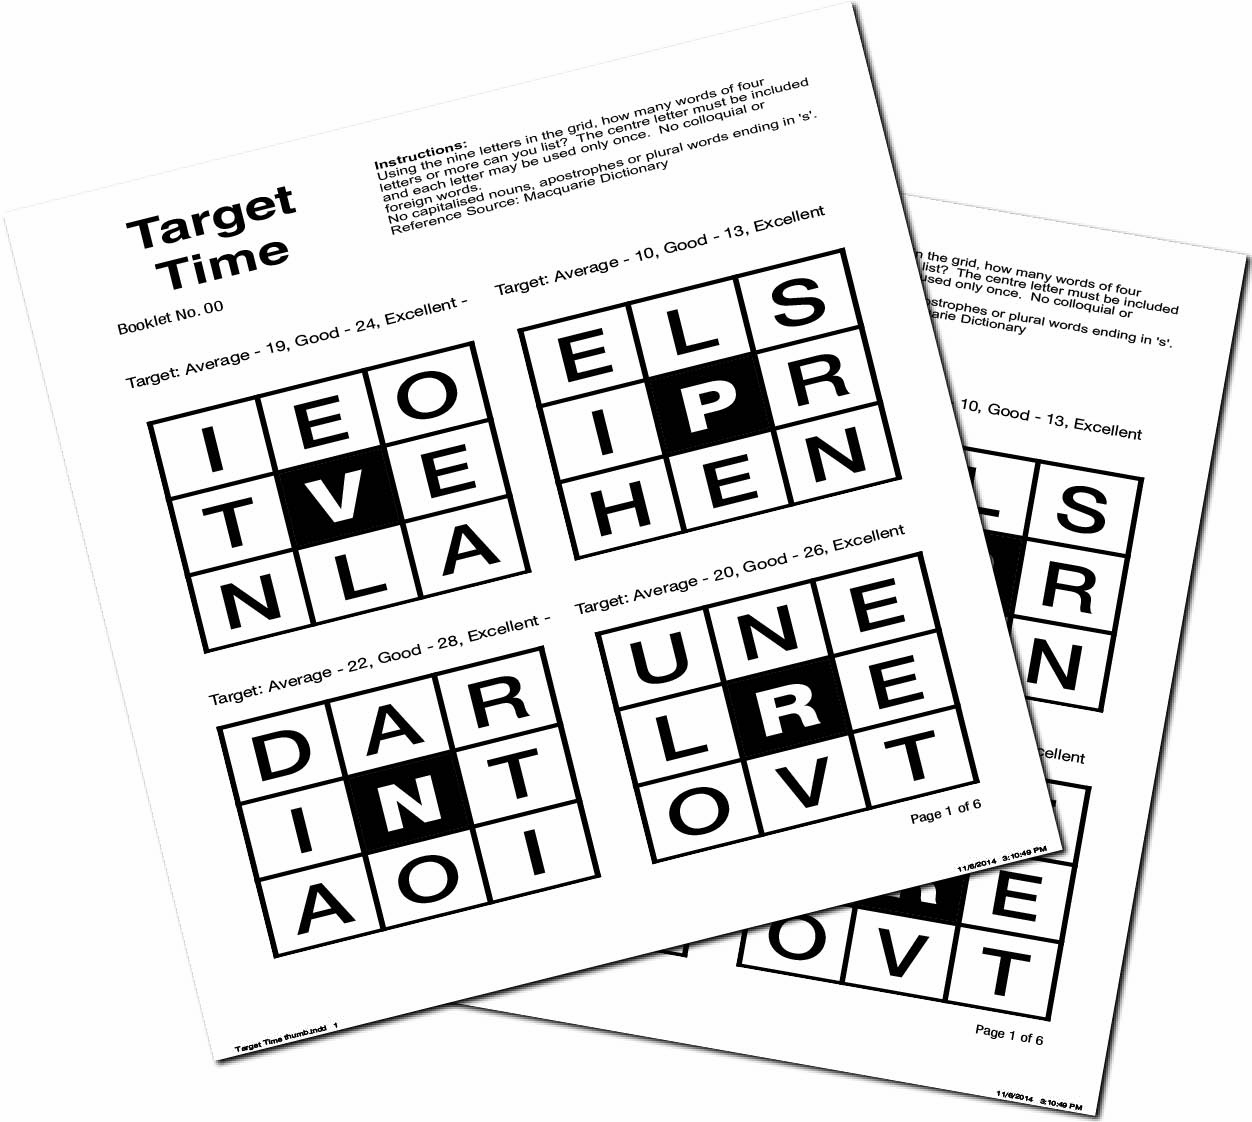 Image 1 for 20 TARGET TIME PUZZLE BOOKLET 01